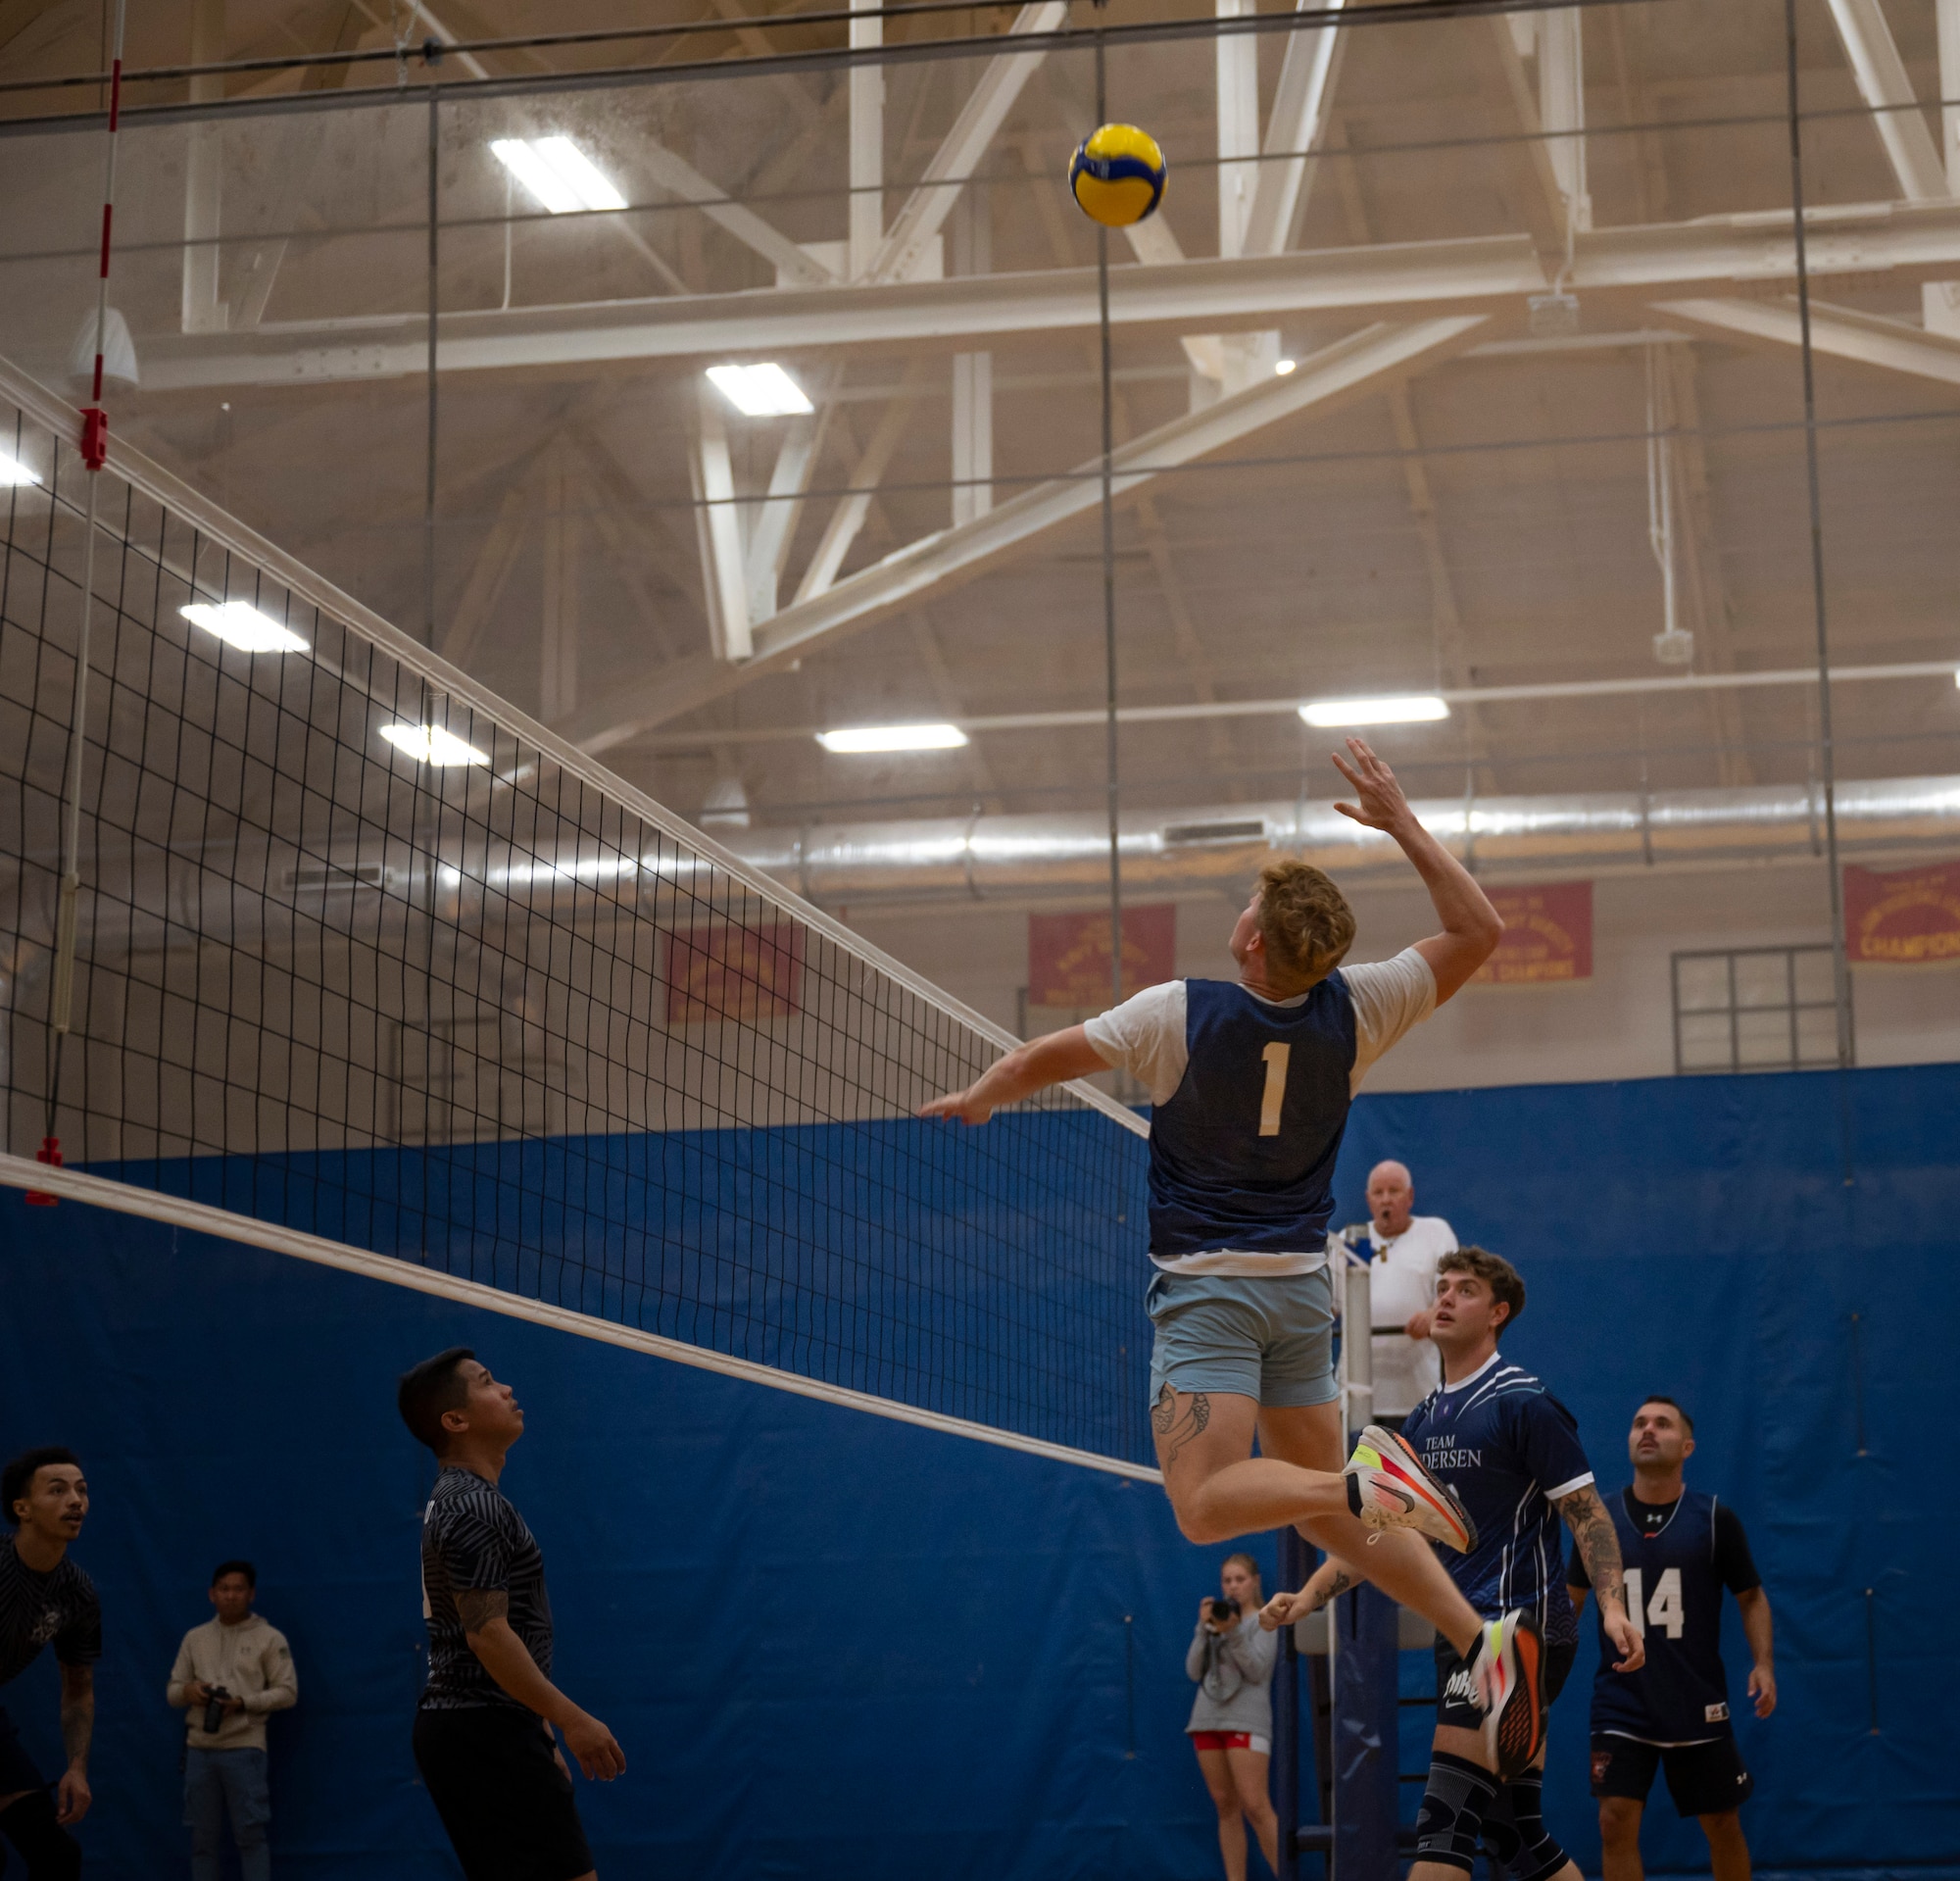 U.S. Air Force Staff Sgt. Joshua Bohling, a member of the Civil Engineer Squadron’s intramural volleyball team, jumps to spike the ball during the championship game on Andersen Air Force Base, Guam, Oct. 26, 2023. Andersen’s intramural volleyball league ended in a climactic final game between the Security Forces Squadron and CES. The game ended with SFS being named the champions. (U.S. Air Force photo by Airman 1st Class Spencer Perkins)